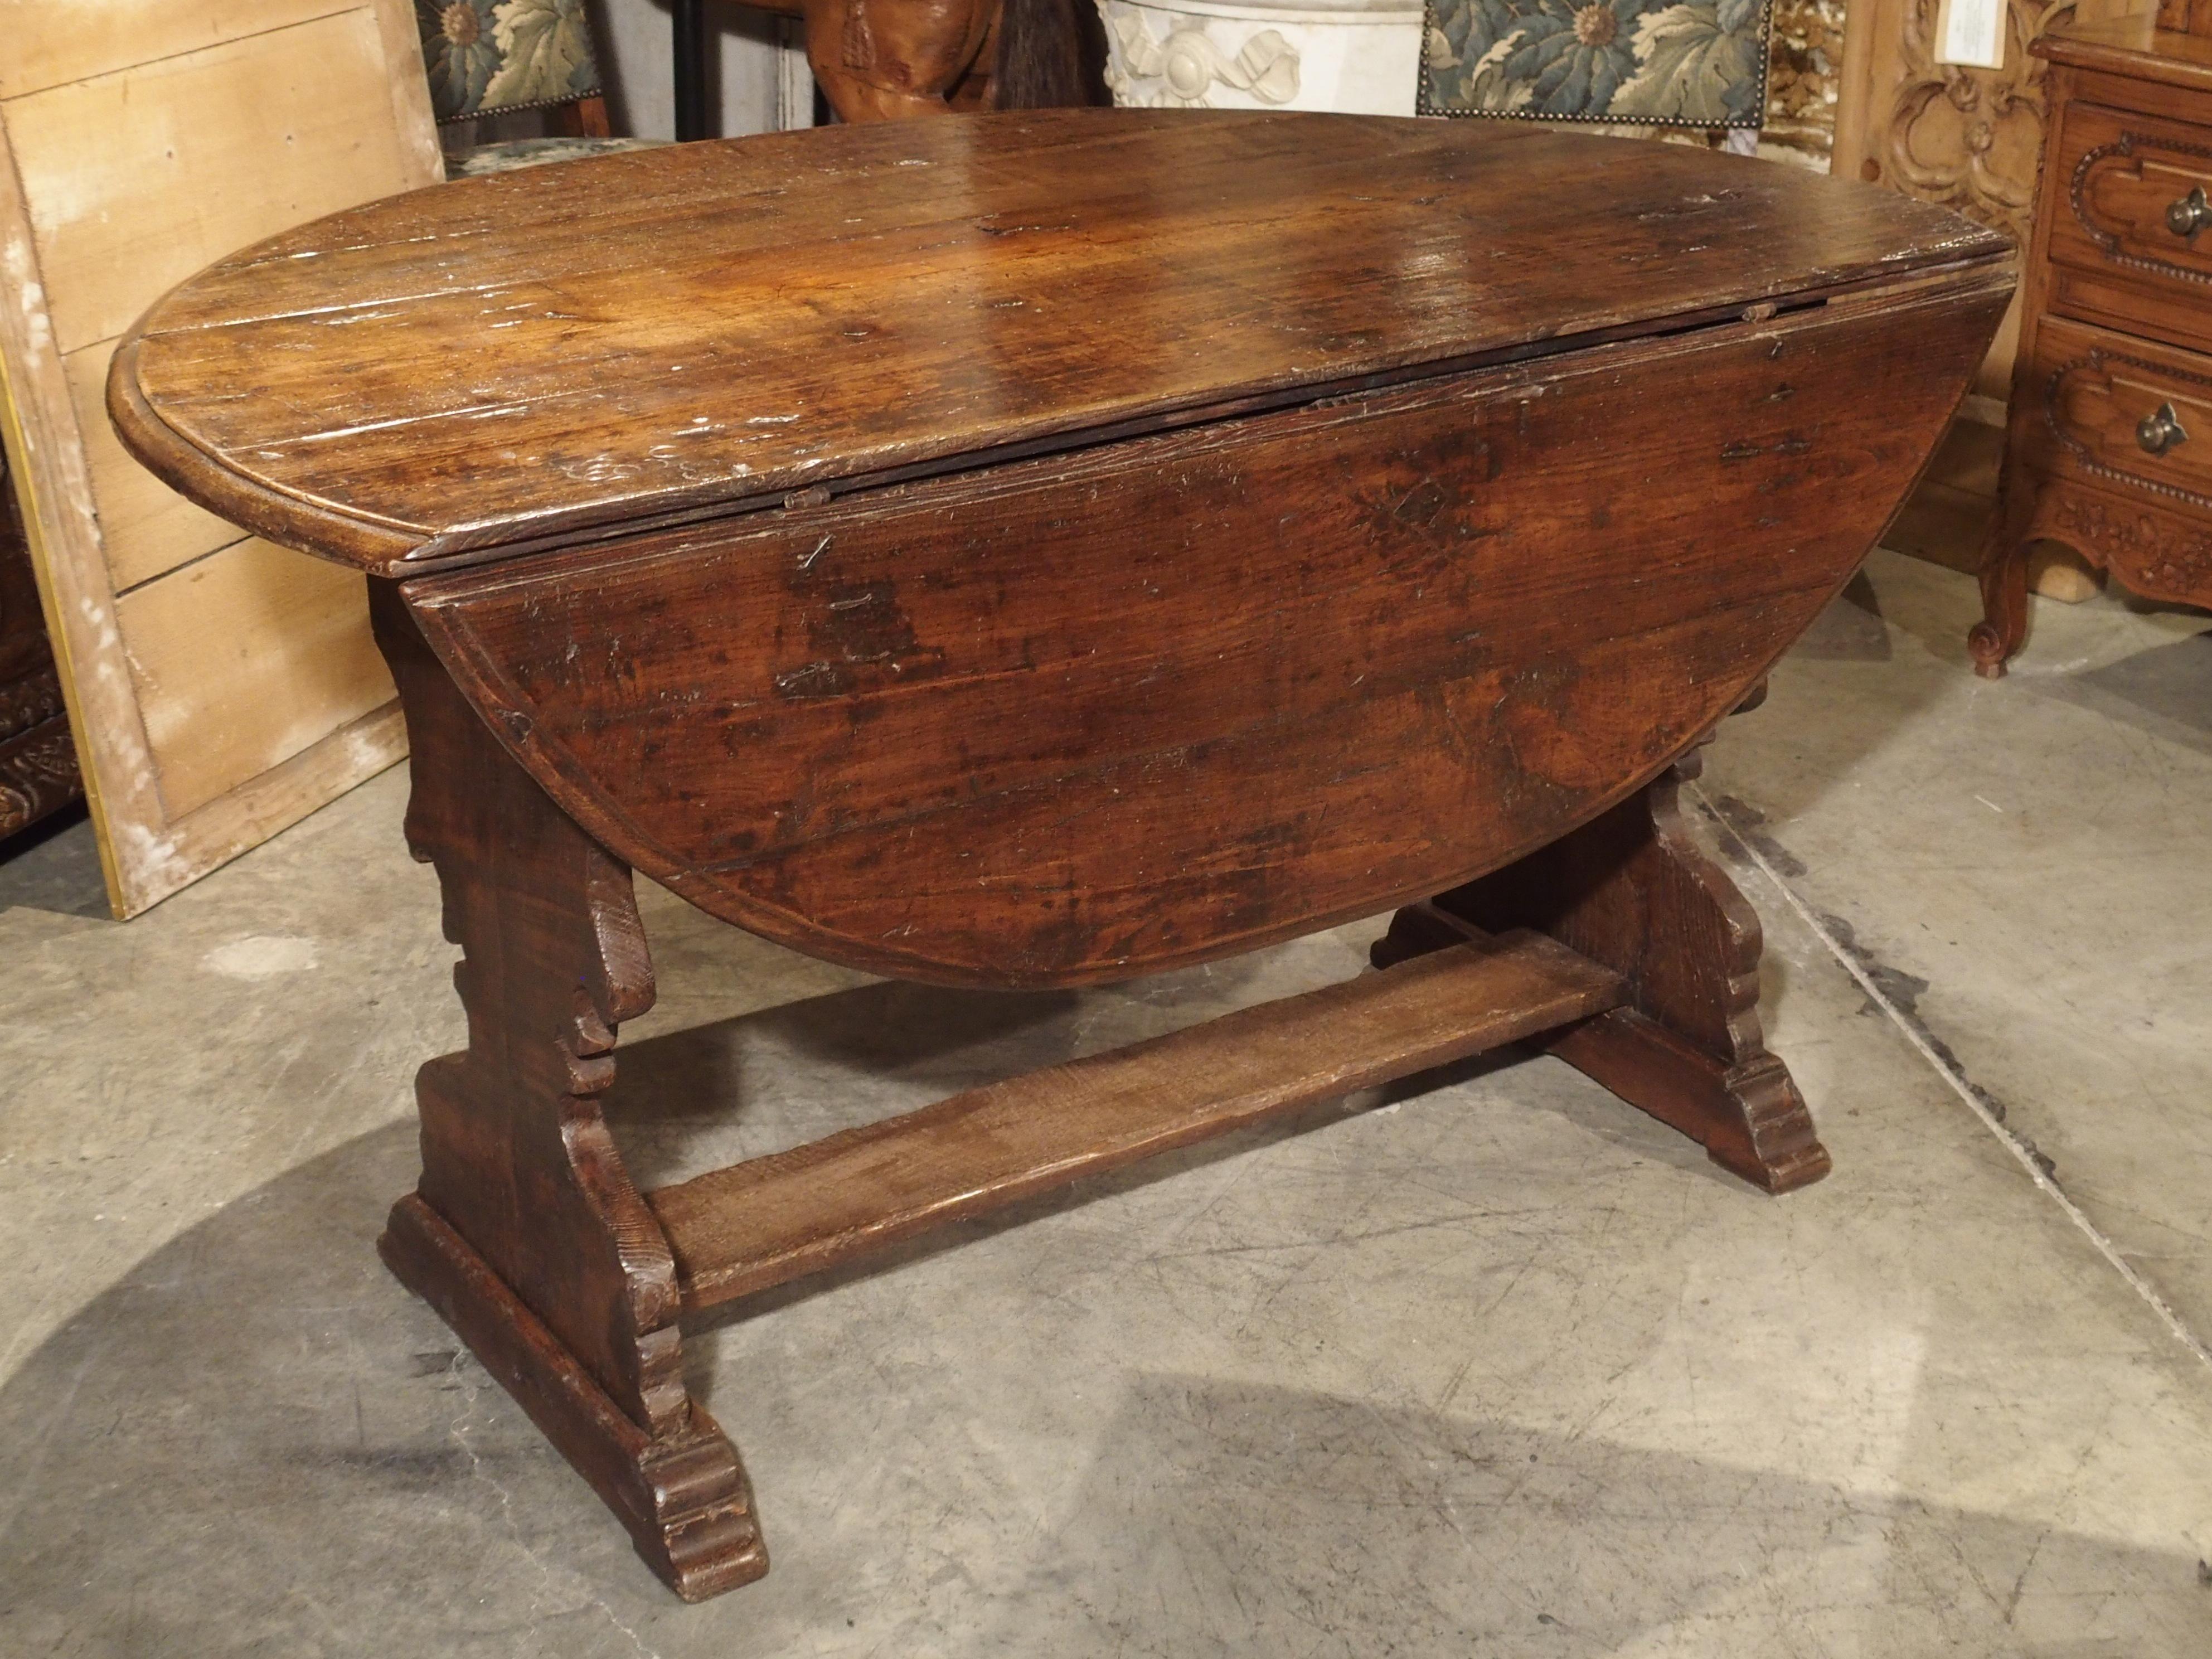 Antique Chestnut Wood Drop Leaf Table from Italy, circa 1790 11